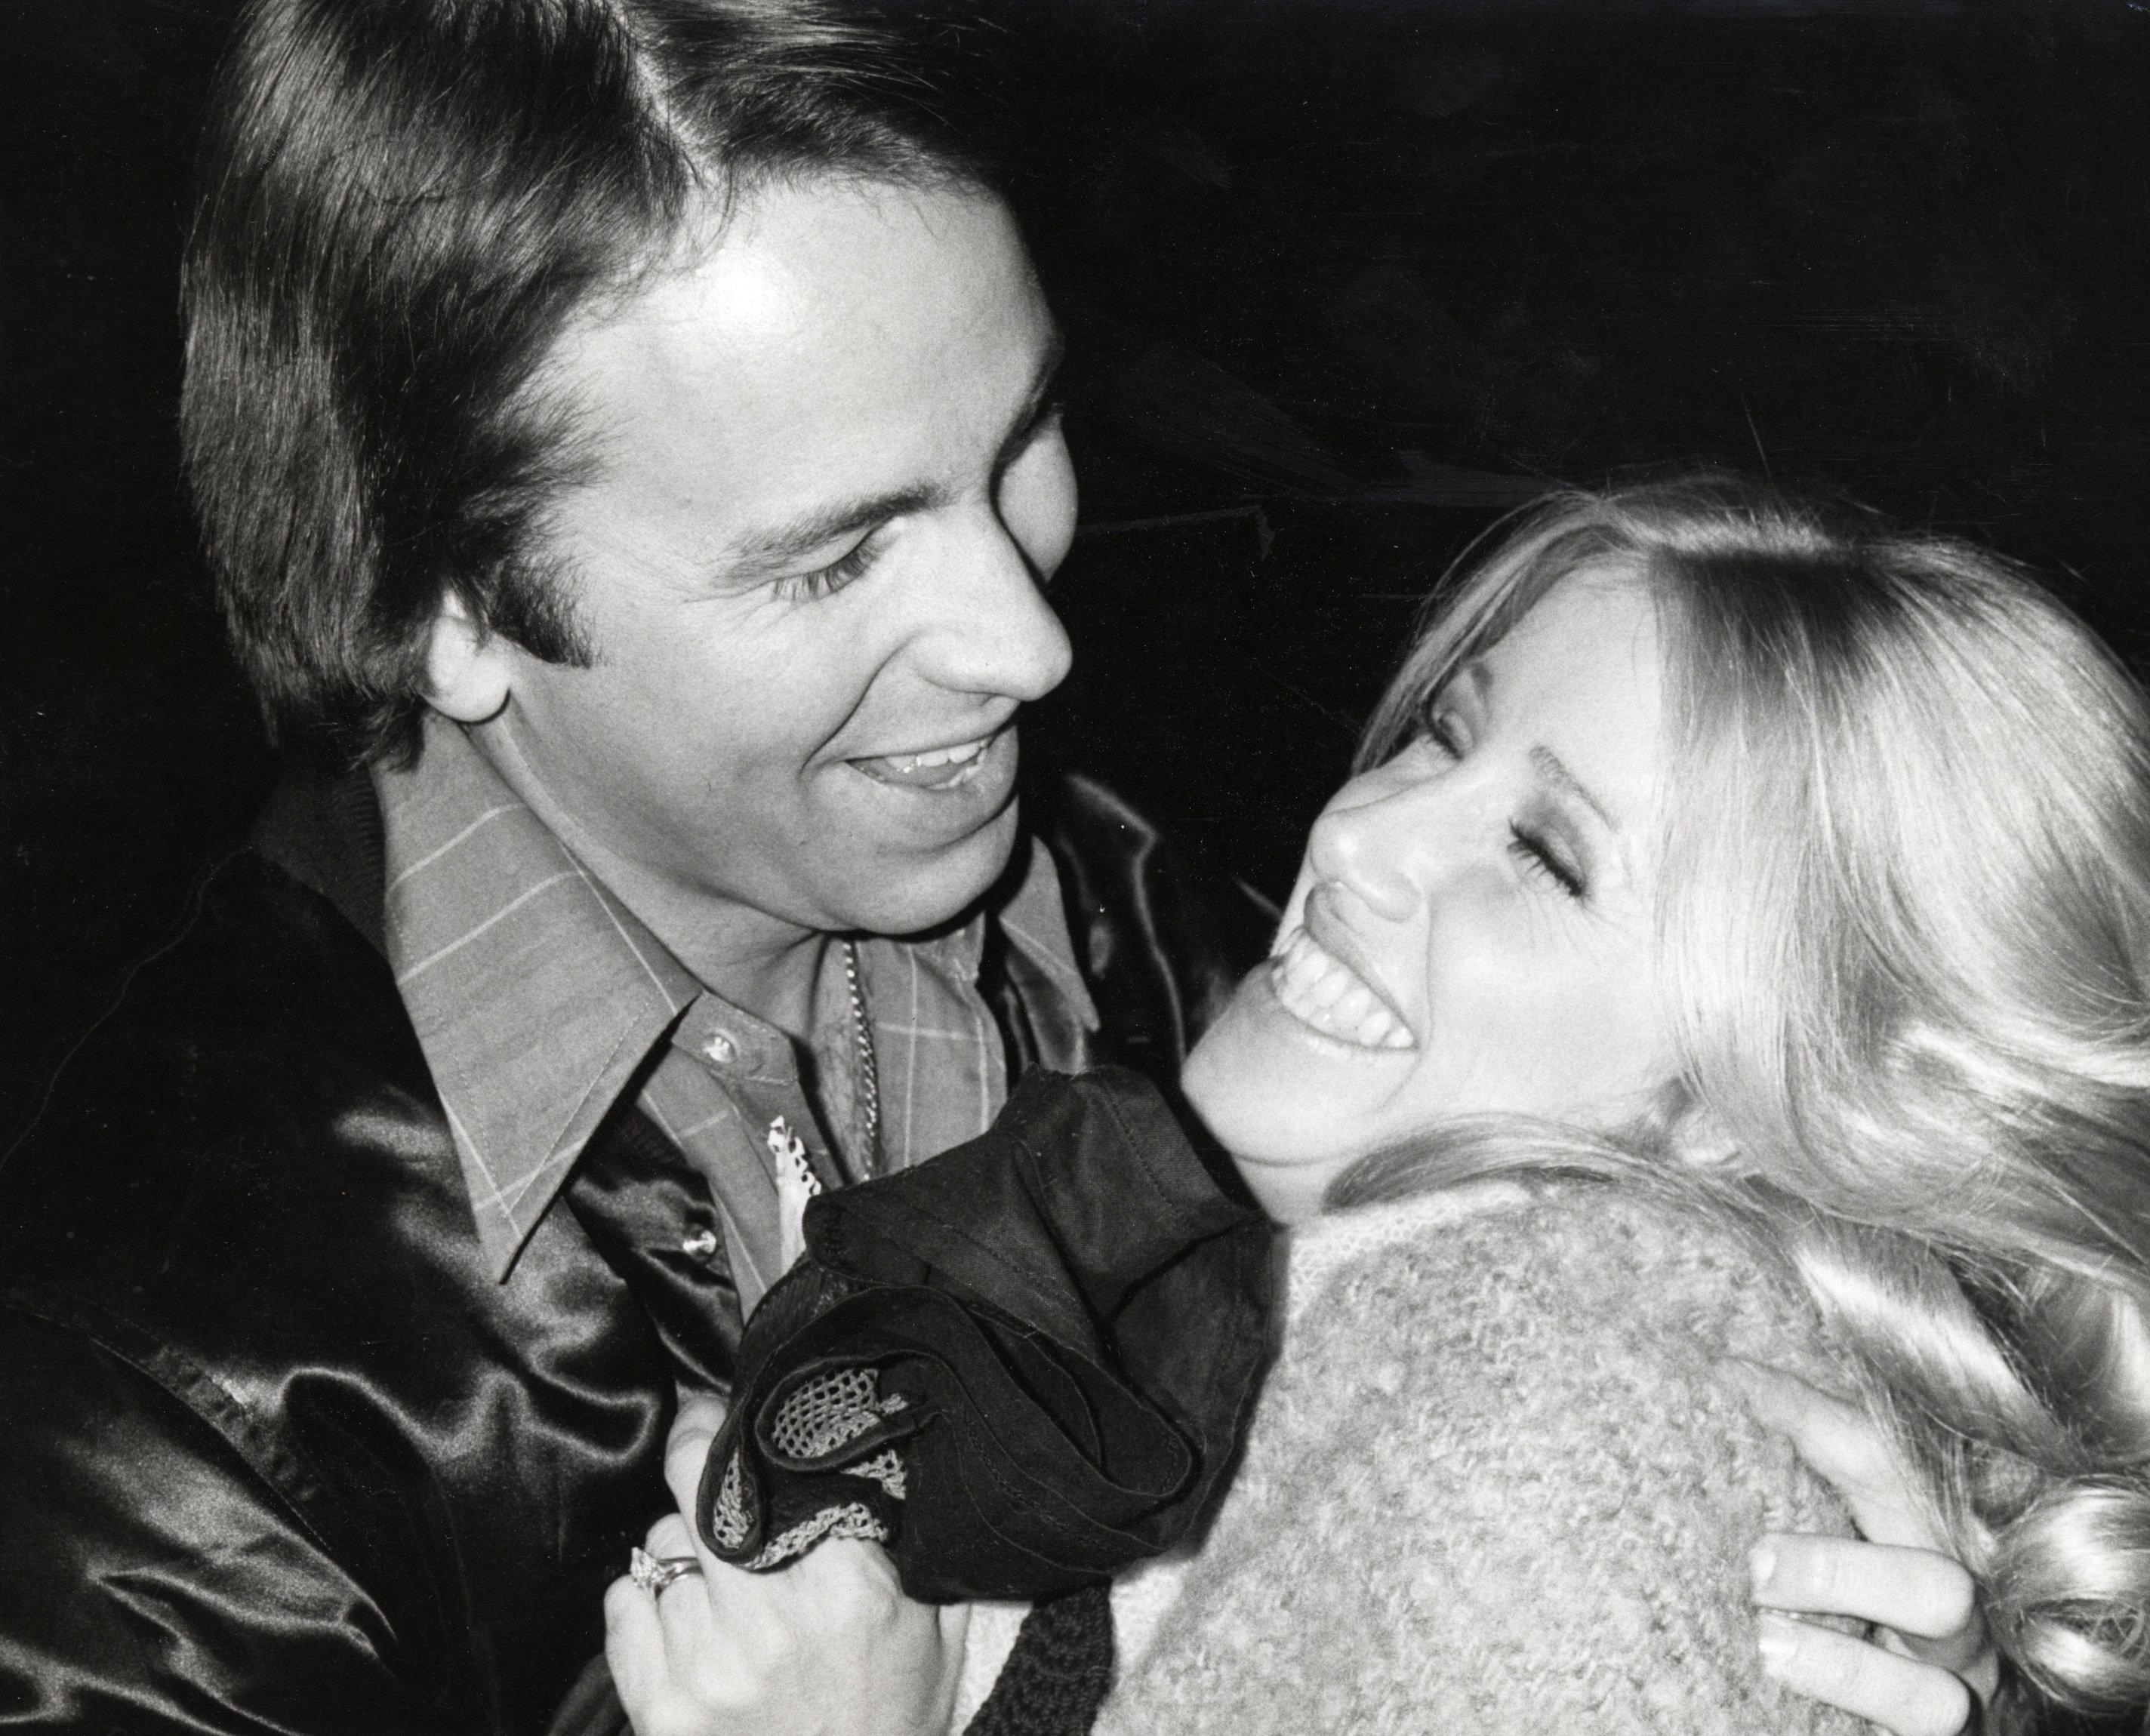 John Ritter and Suzanne Somers, 1978